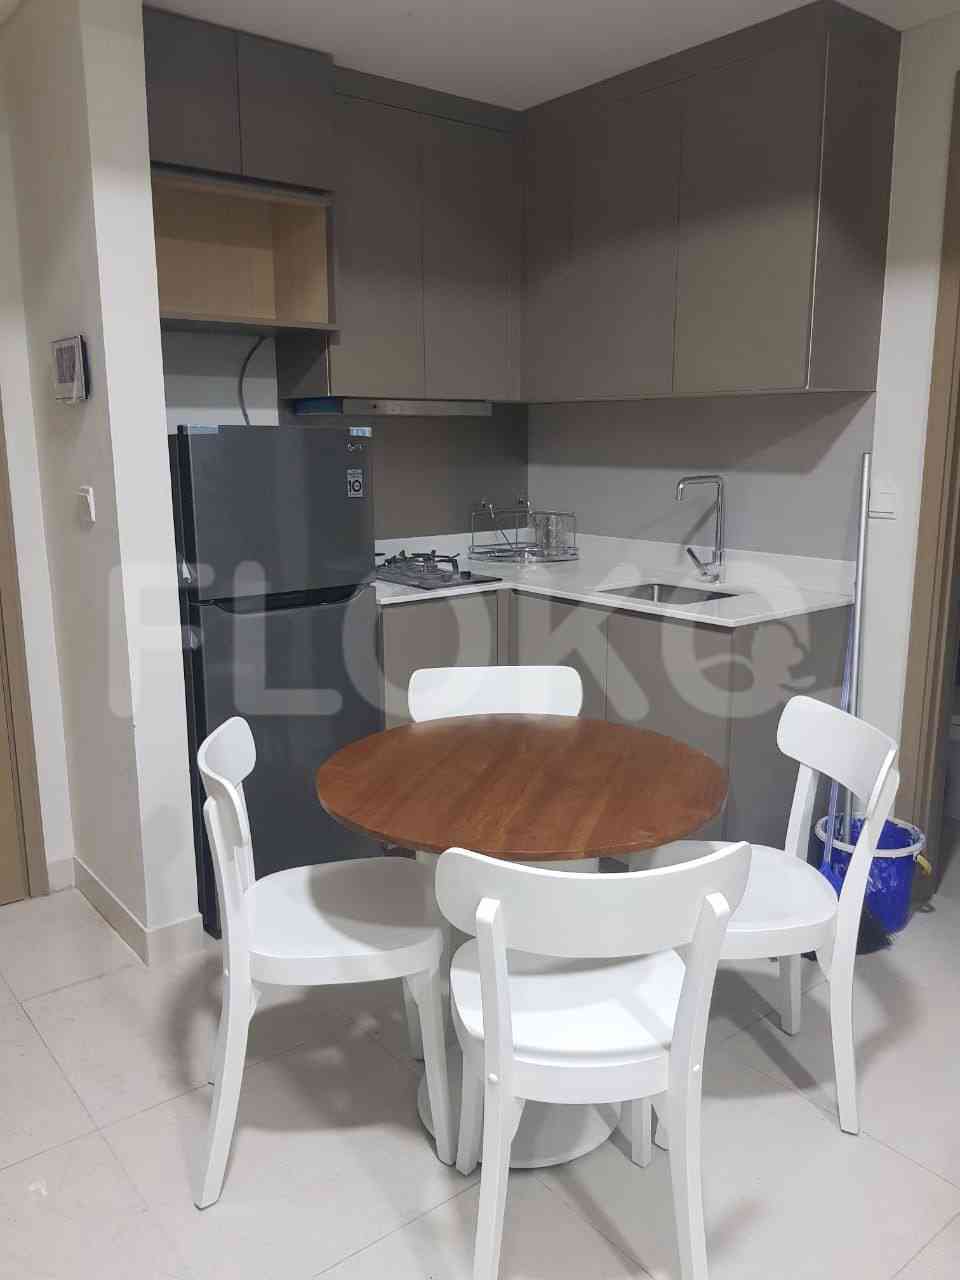 2 Bedroom on 7th Floor for Rent in Gold Coast Apartment - fka477 2